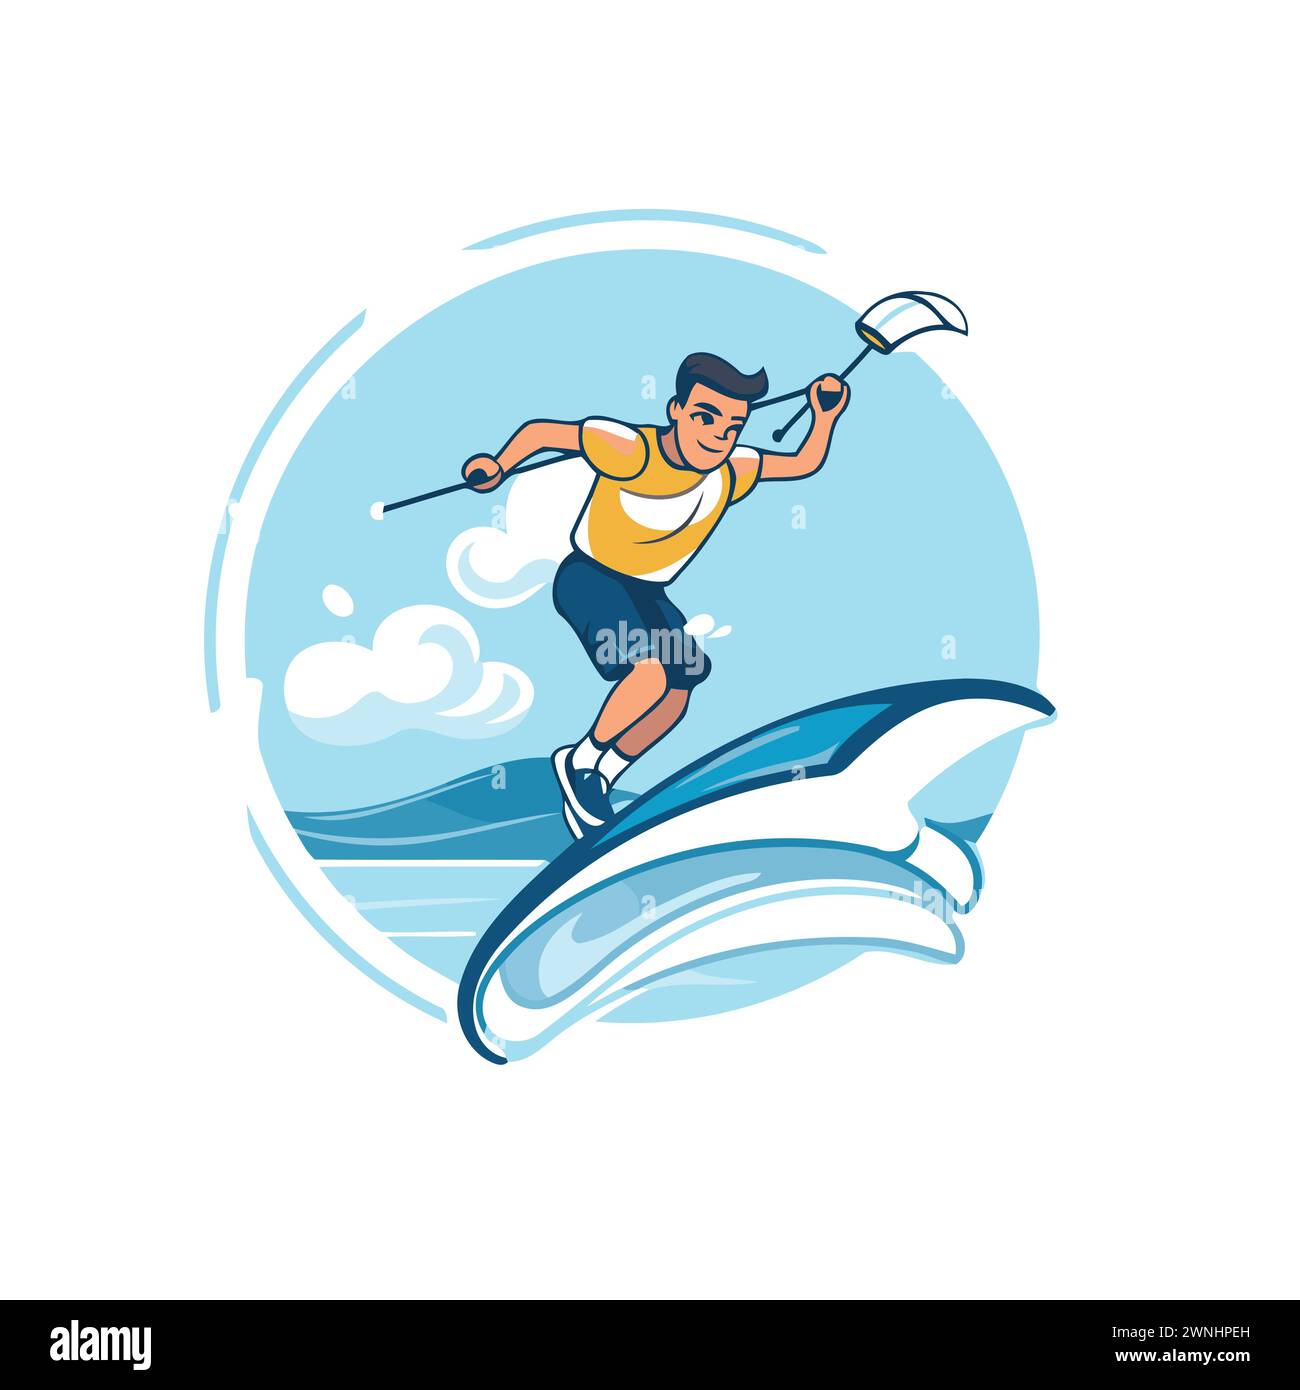 Water skiing. Vector illustration of a man riding a water ski on a board. Stock Vector